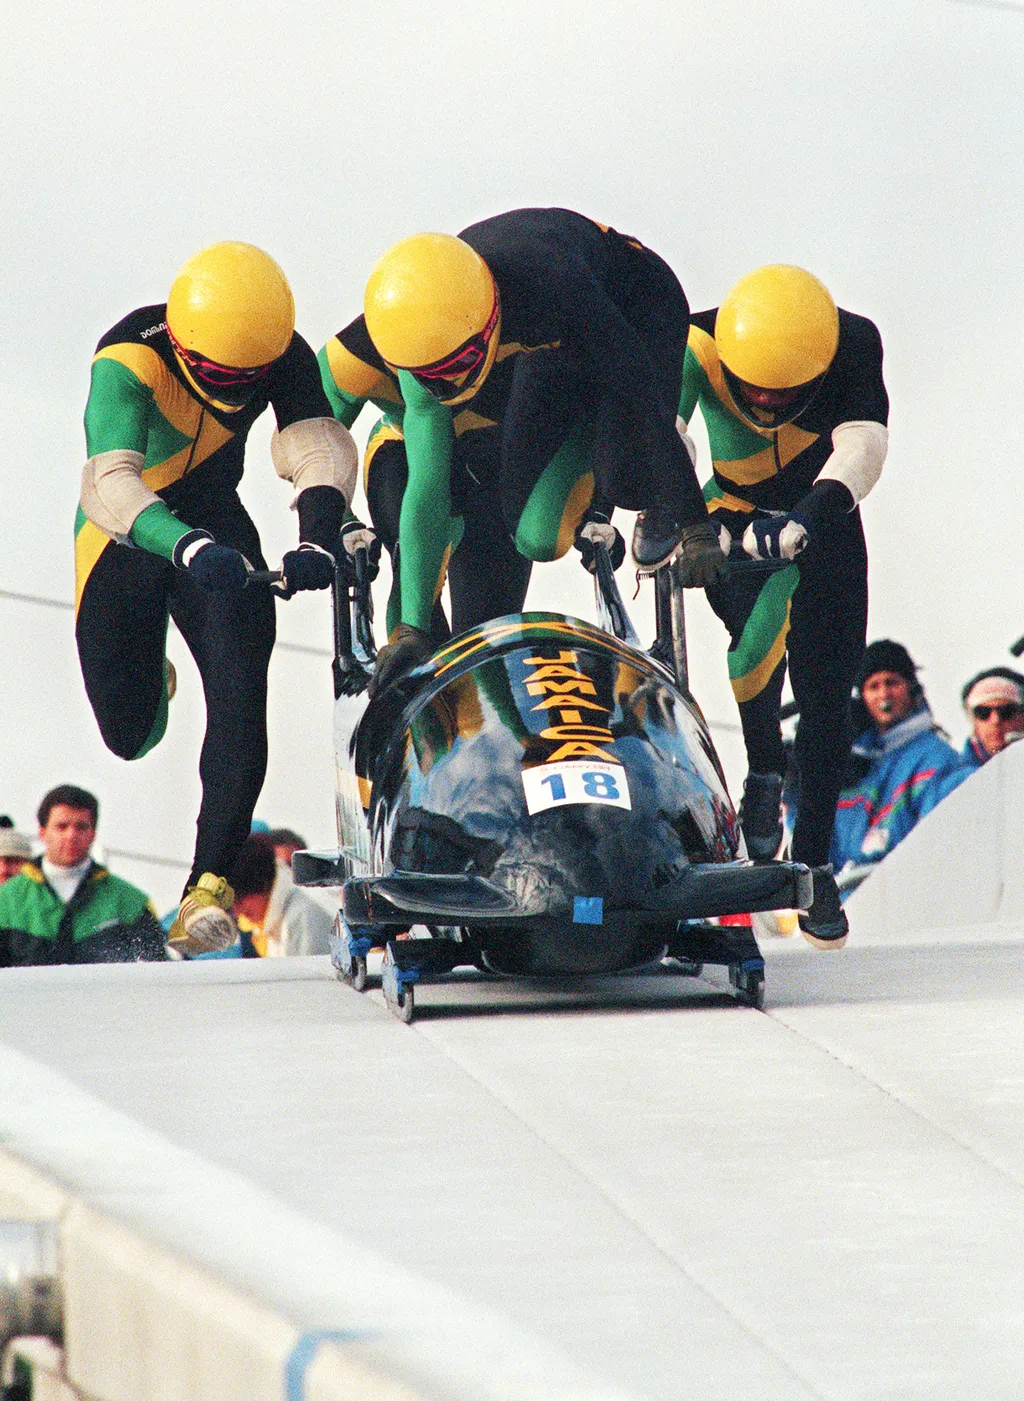 OLY-WINTER-1988-BOBSLEIGH-JAMAICA Vertical SPORT-ACTION MAN OLYMPIC GAMES BOBSLEIGH 